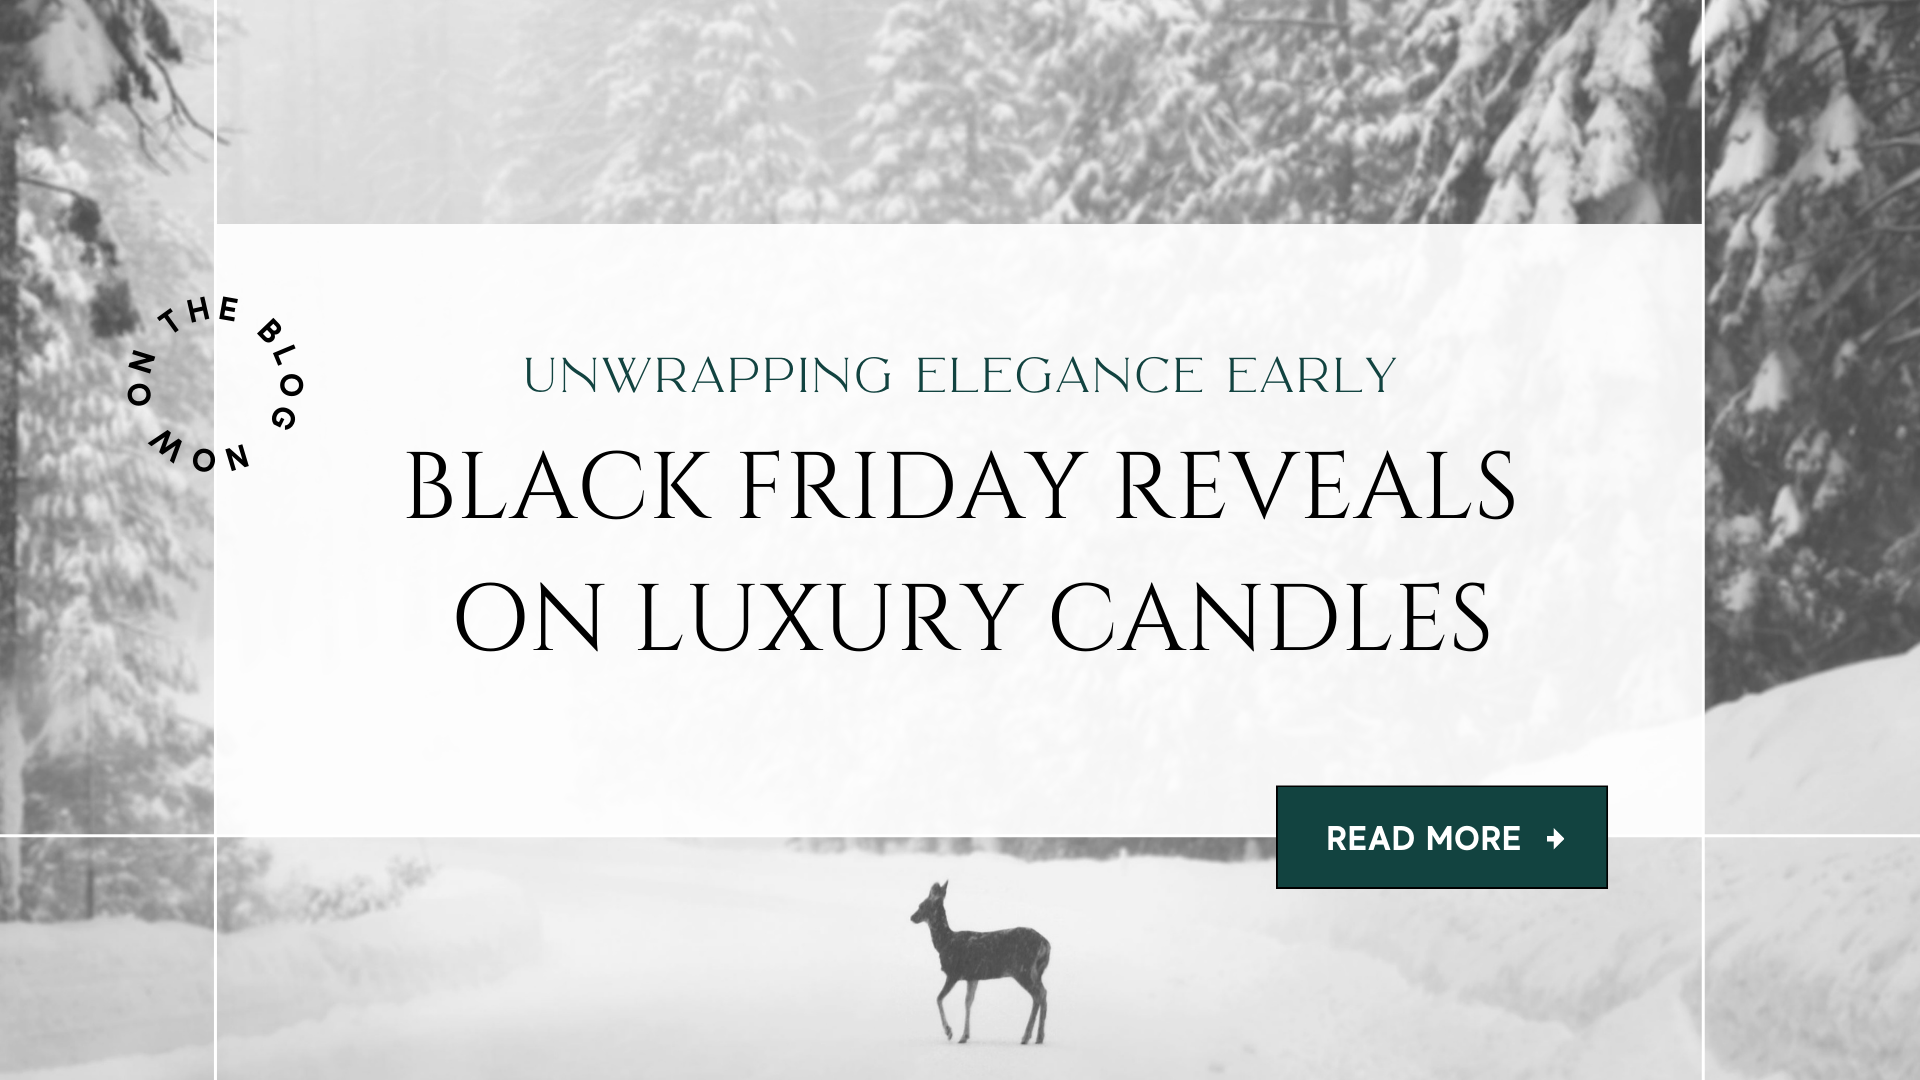 Unwrapping Elegance Early: Black Friday Reveals On Luxury Candles